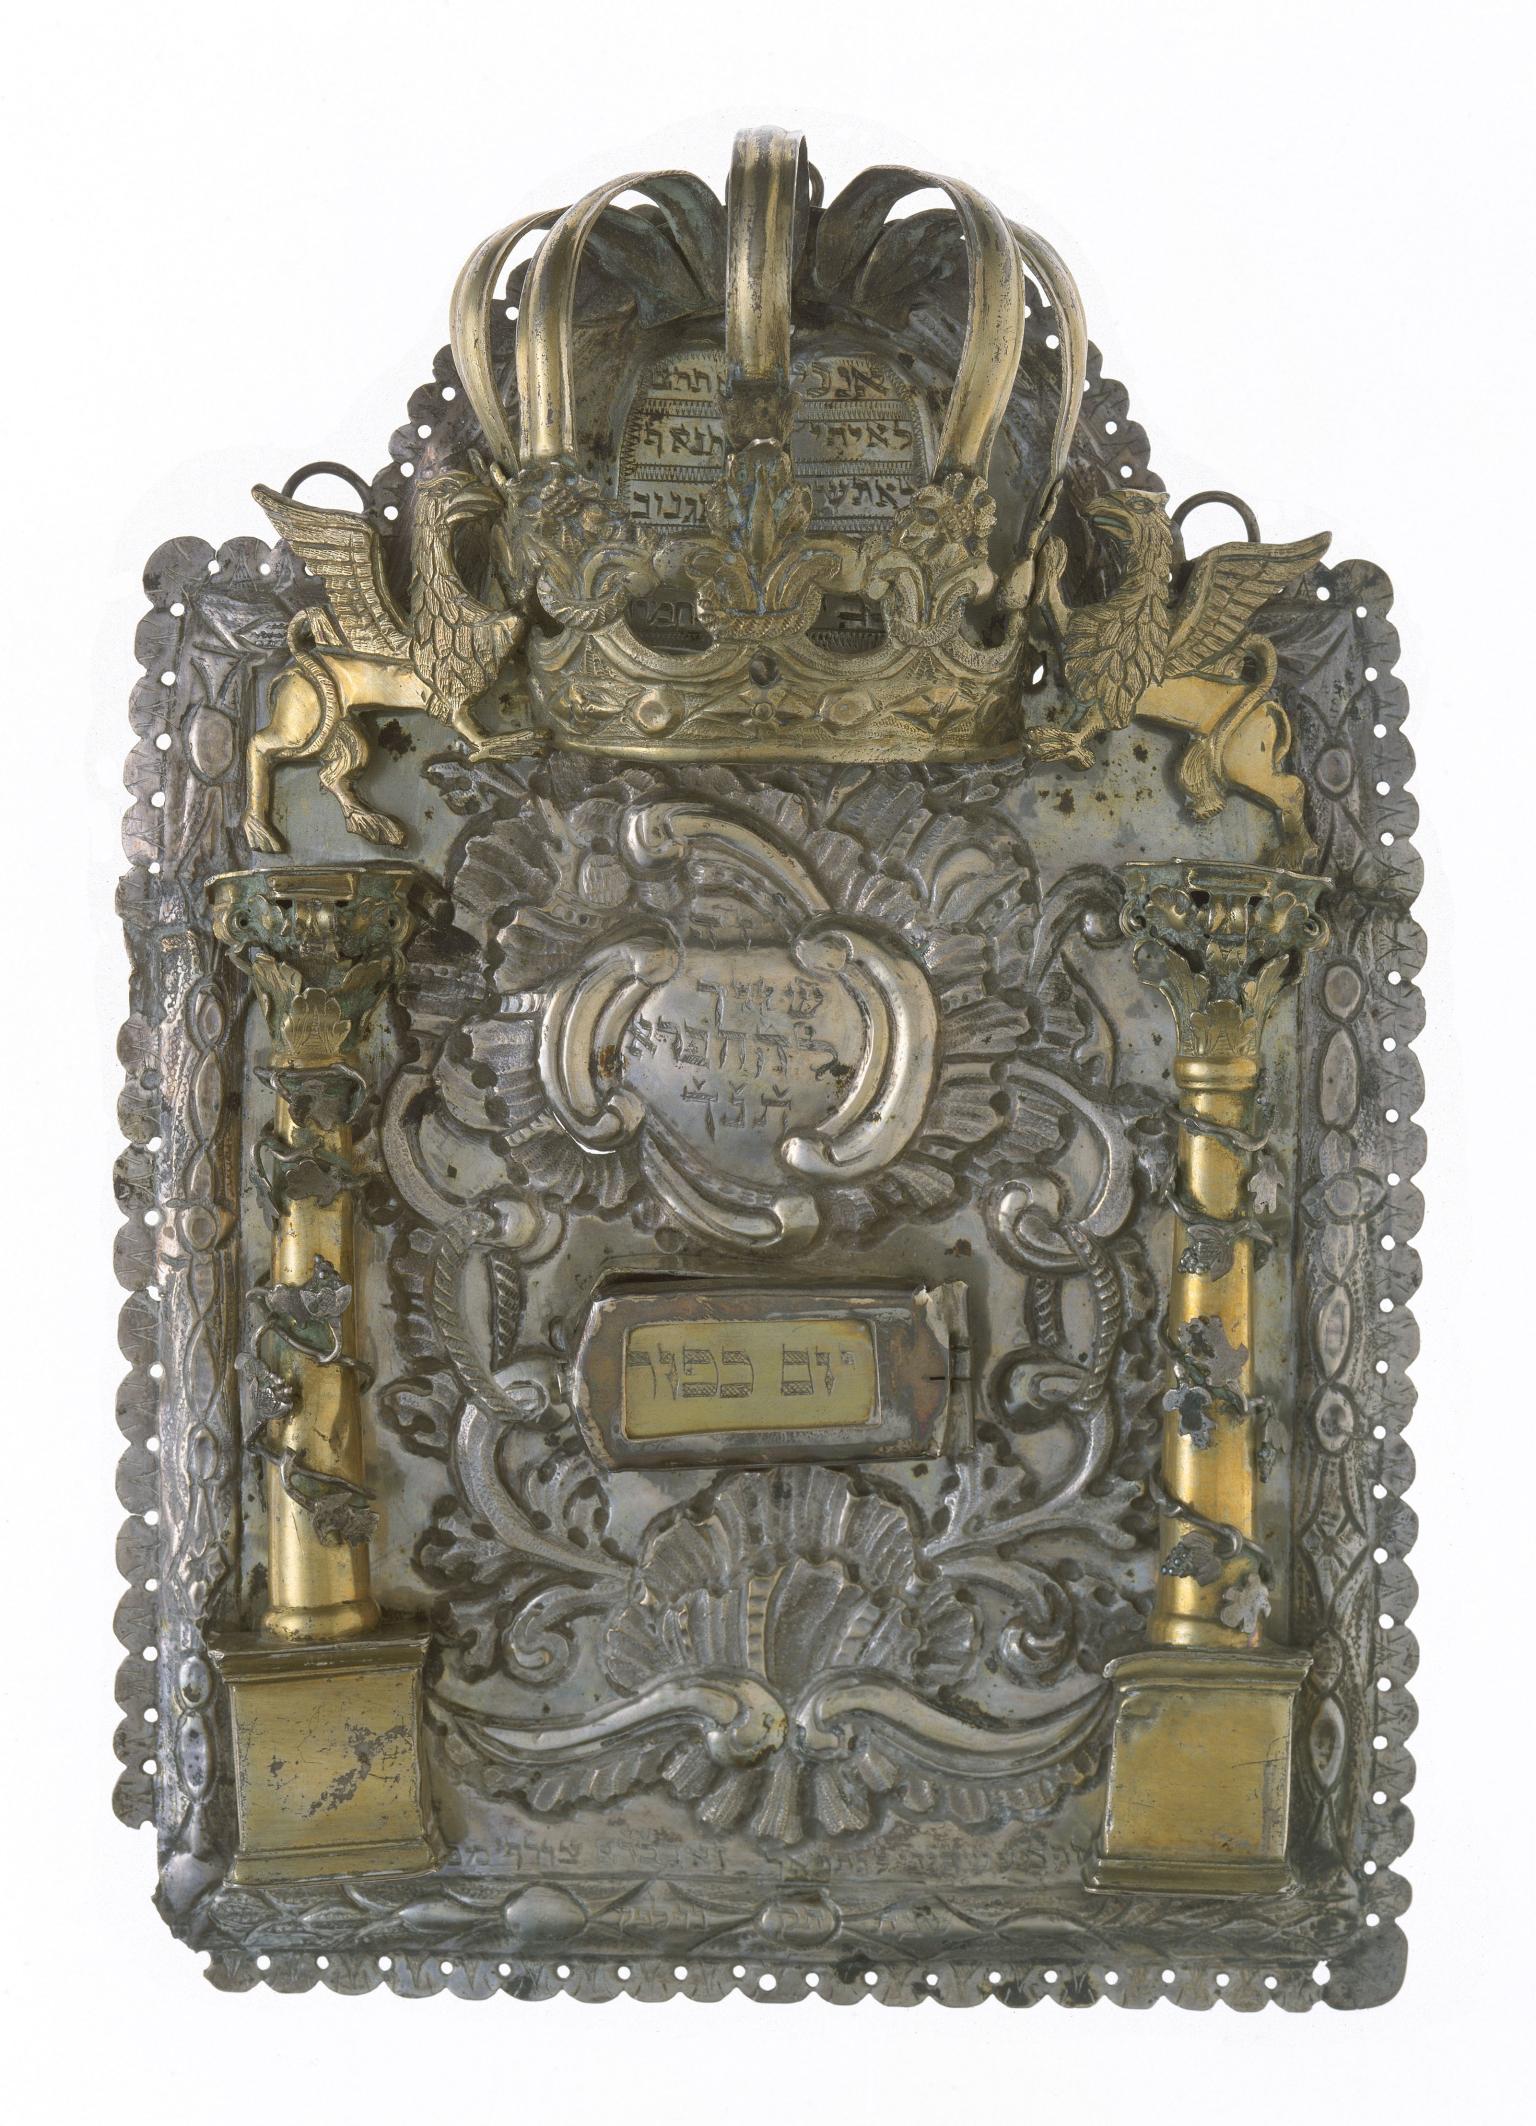 Shield with Hebrew text, gold columns, griffins, and crown on top.